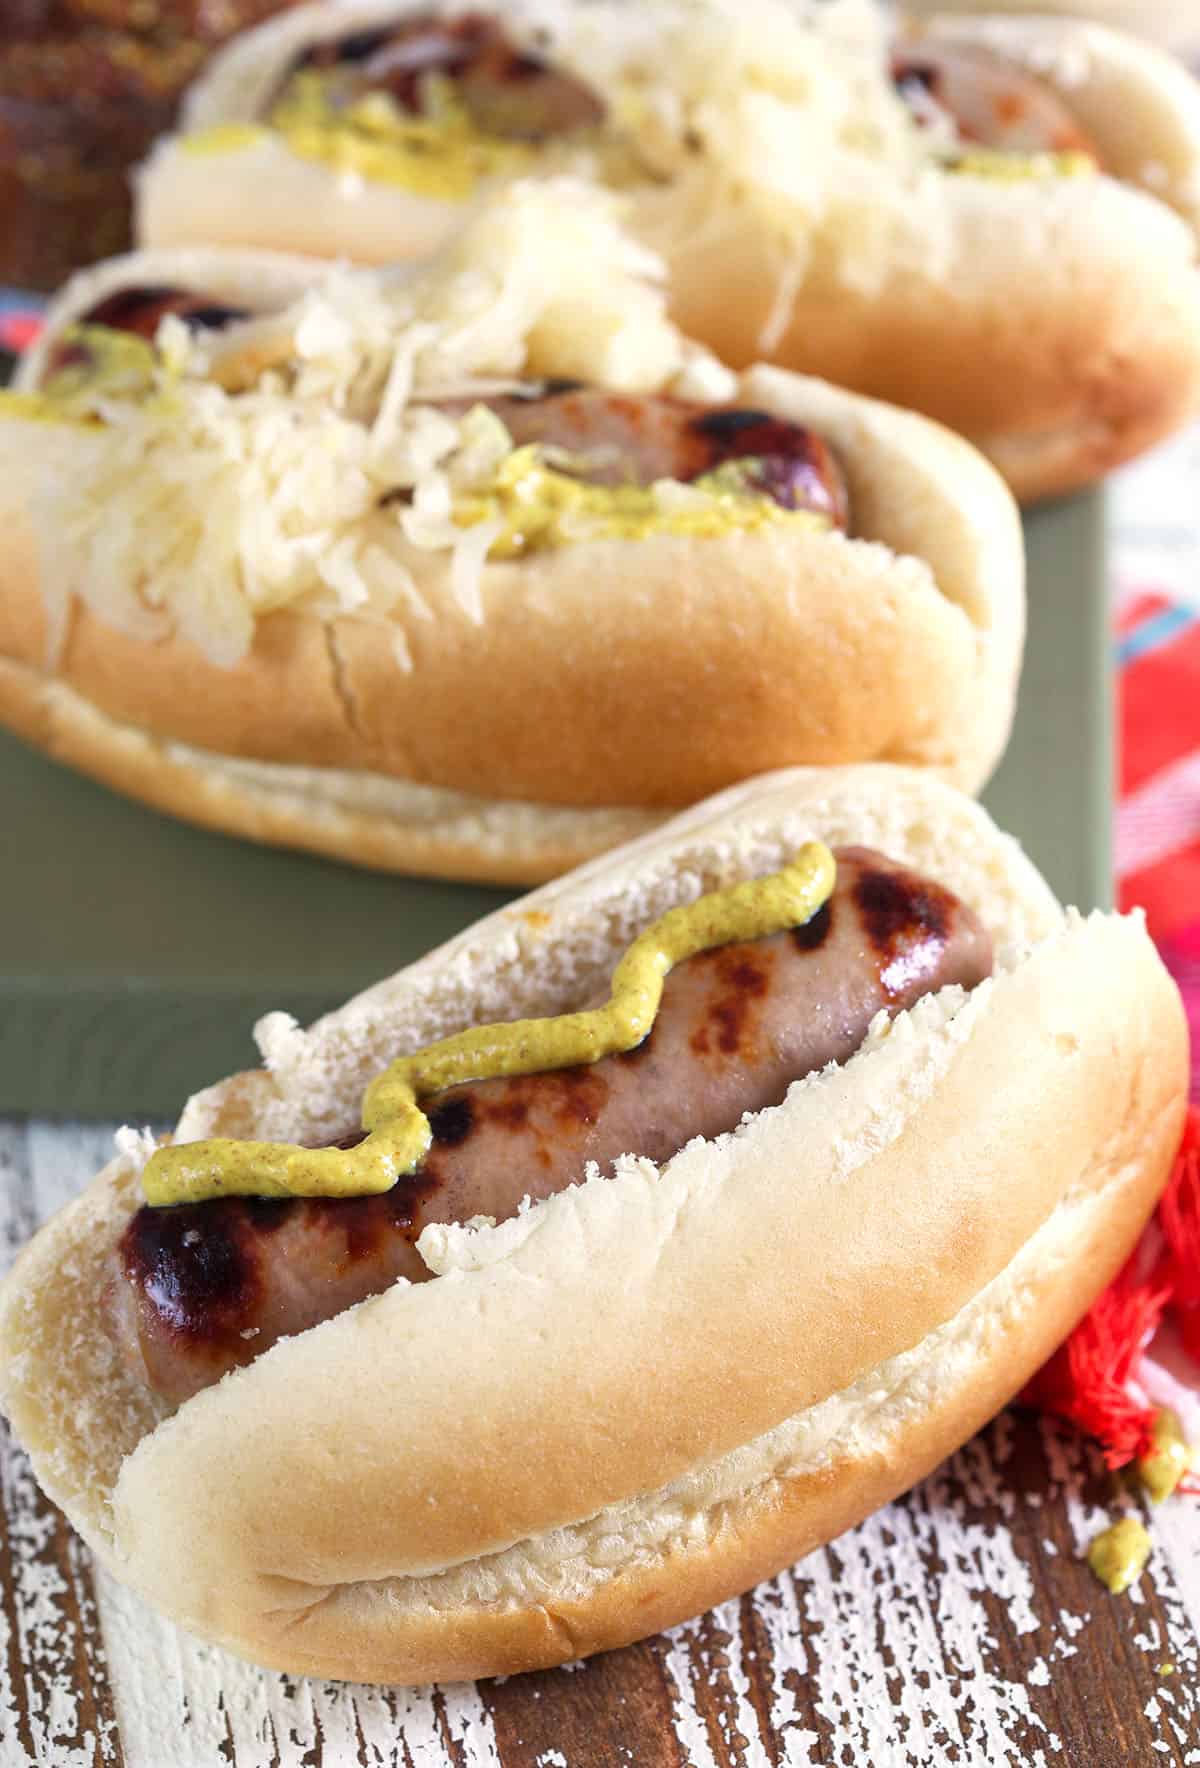 Mustard is drizzled on a beer brat. 